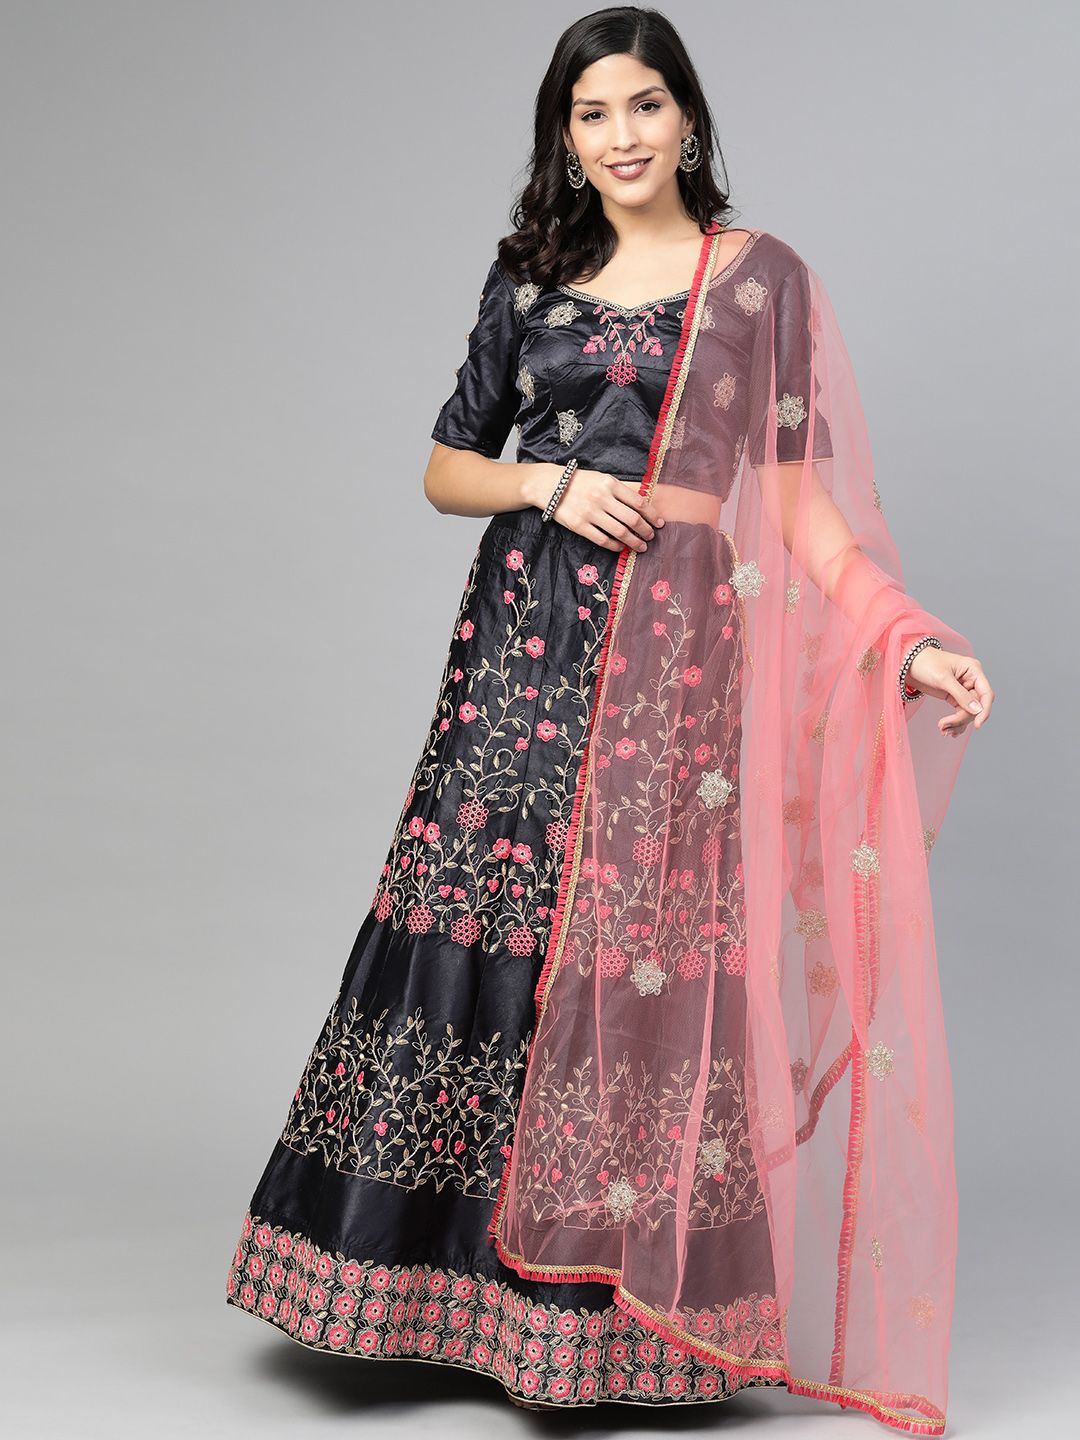 SHOPGARB Navy Blue & Pink Embroidered Semi-Stitched Lehenga & Unstitched Blouse with Dupatta Price in India